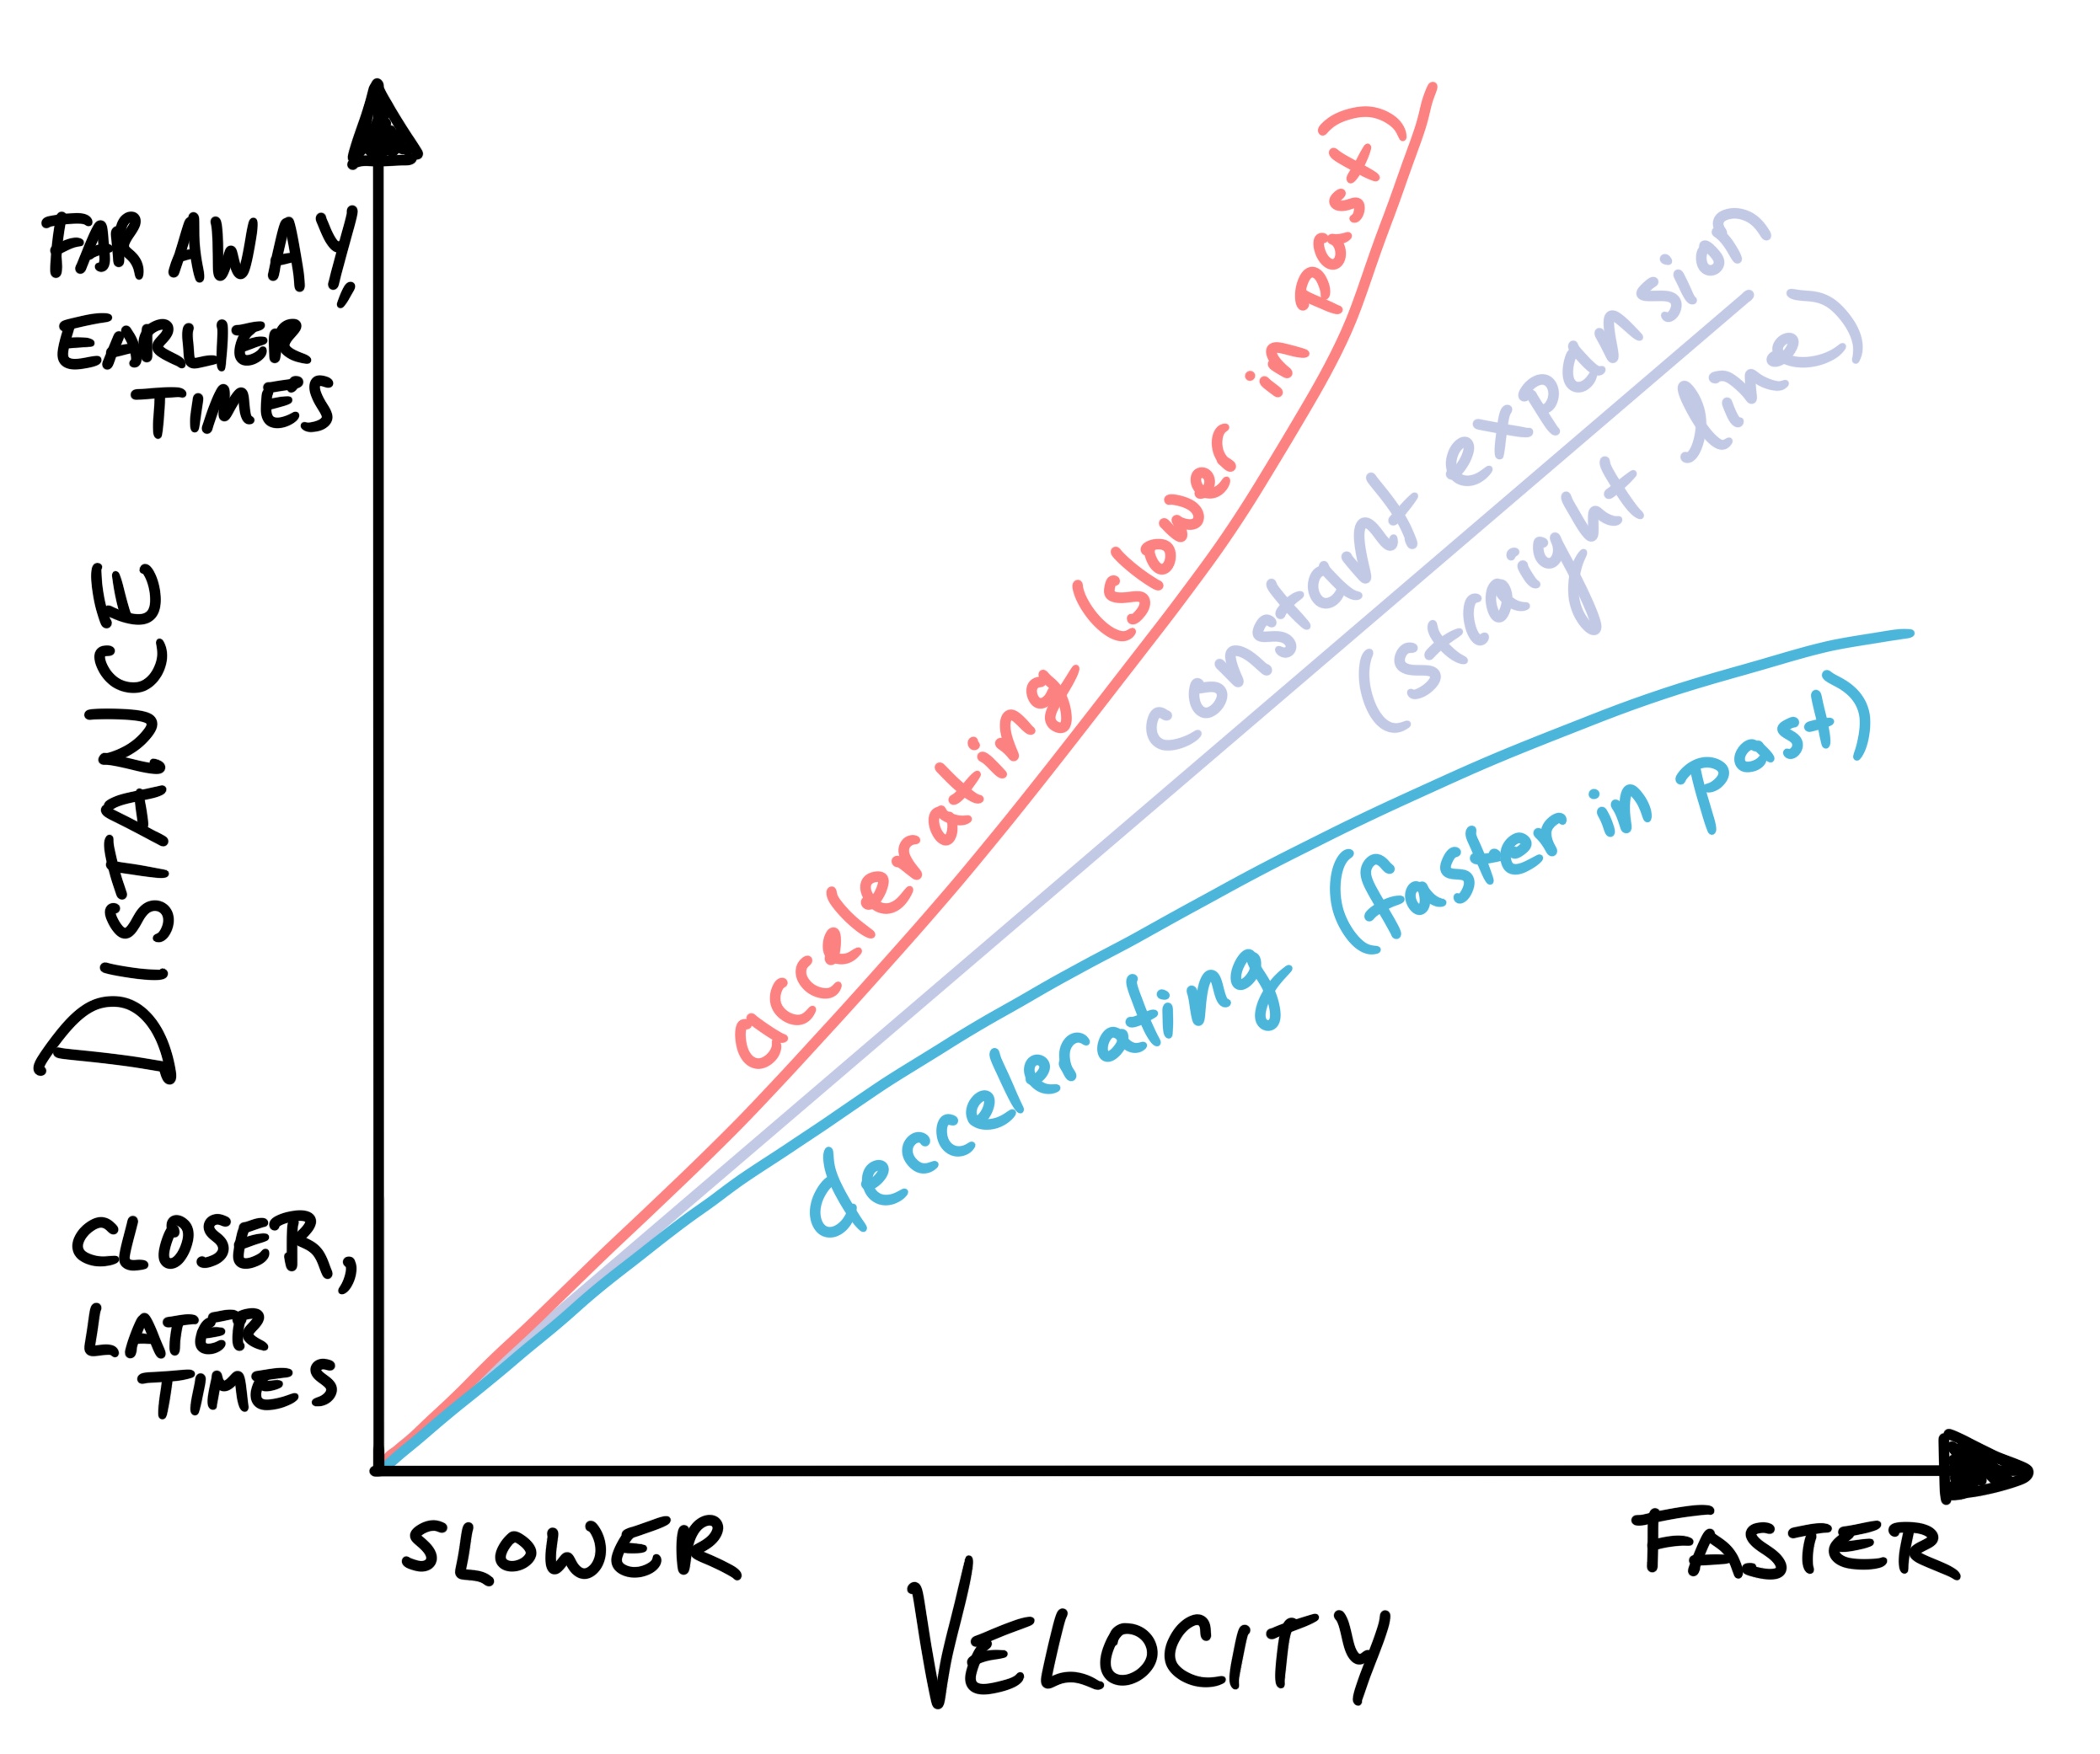 Hand-drawn plot of Hubble diagram showing distance versus velocity. A straight line shows what would be seen for constant expansion rate. A line curving upward says "acceleration, slower in past", while a line curving downwads says "decelleration, faster in past."